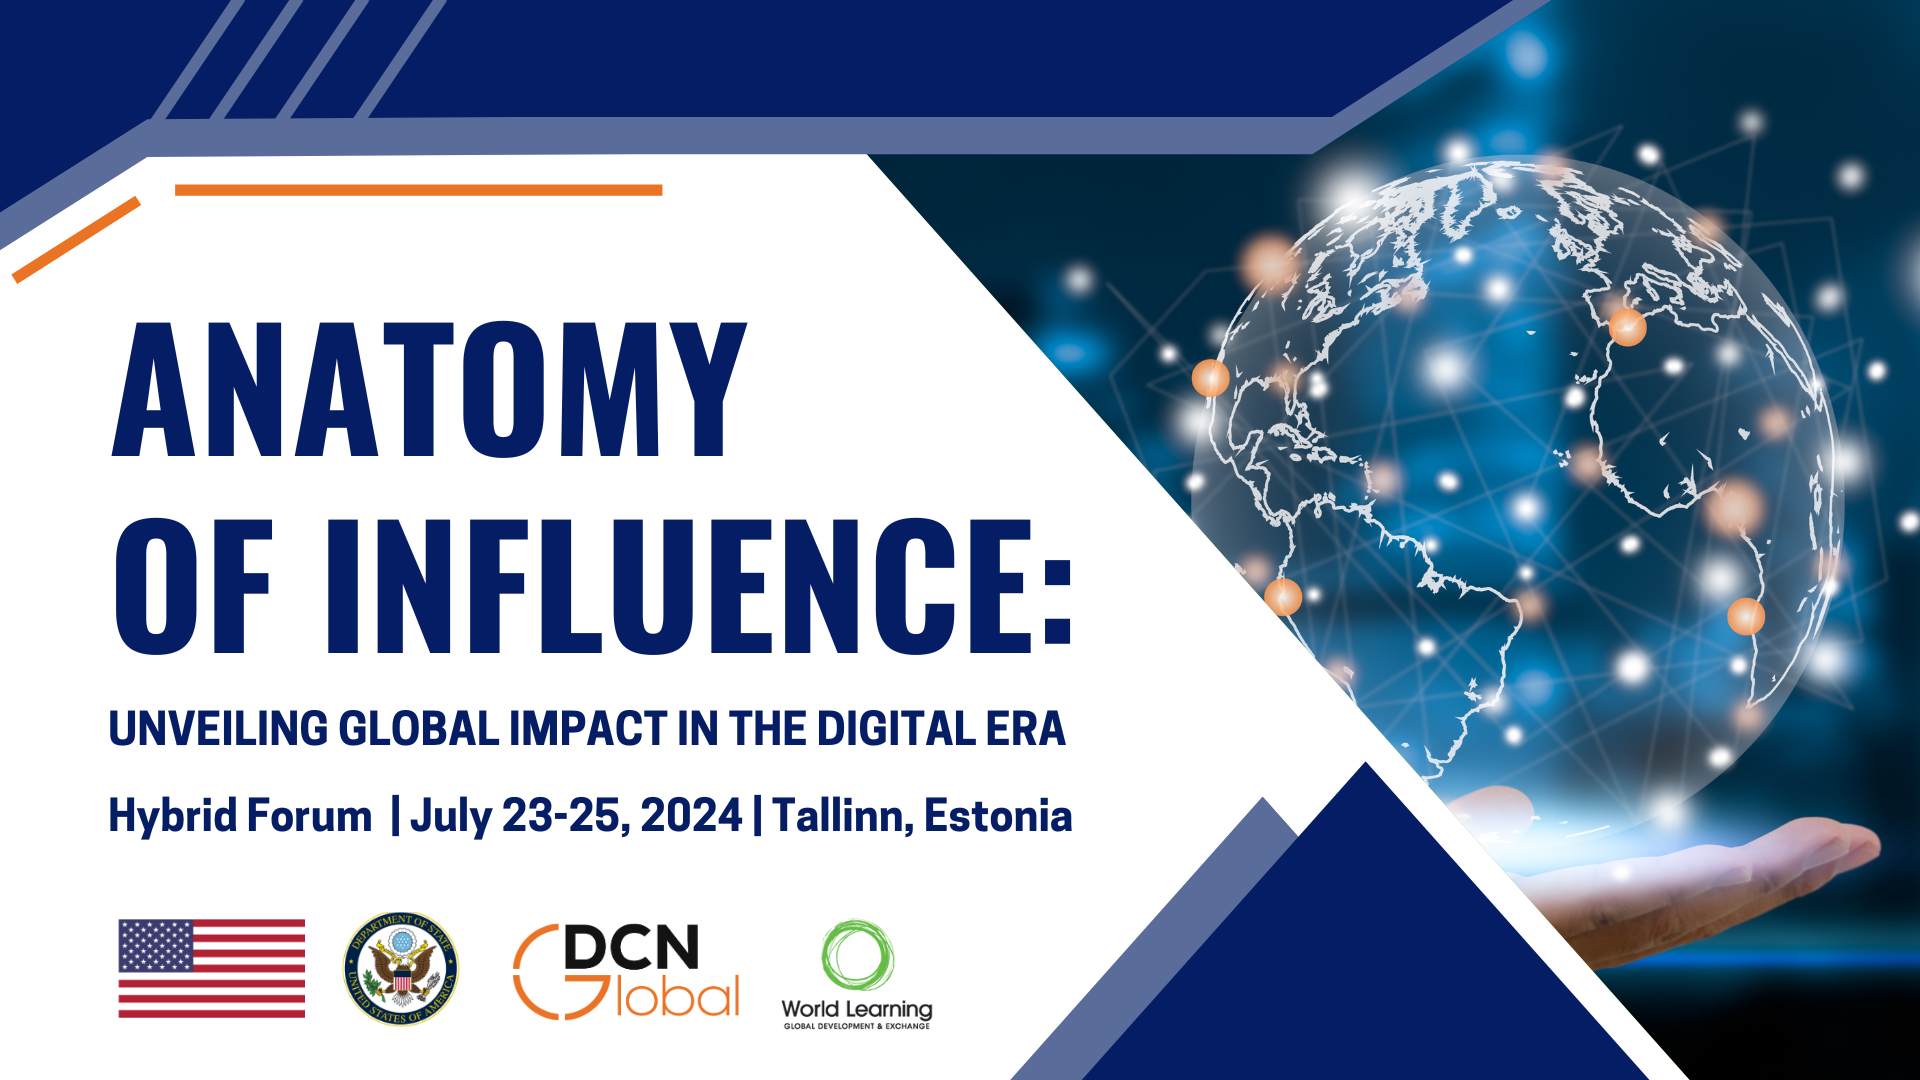 Anatomy of Influence: Unveiling Global Impact in the Digital Era